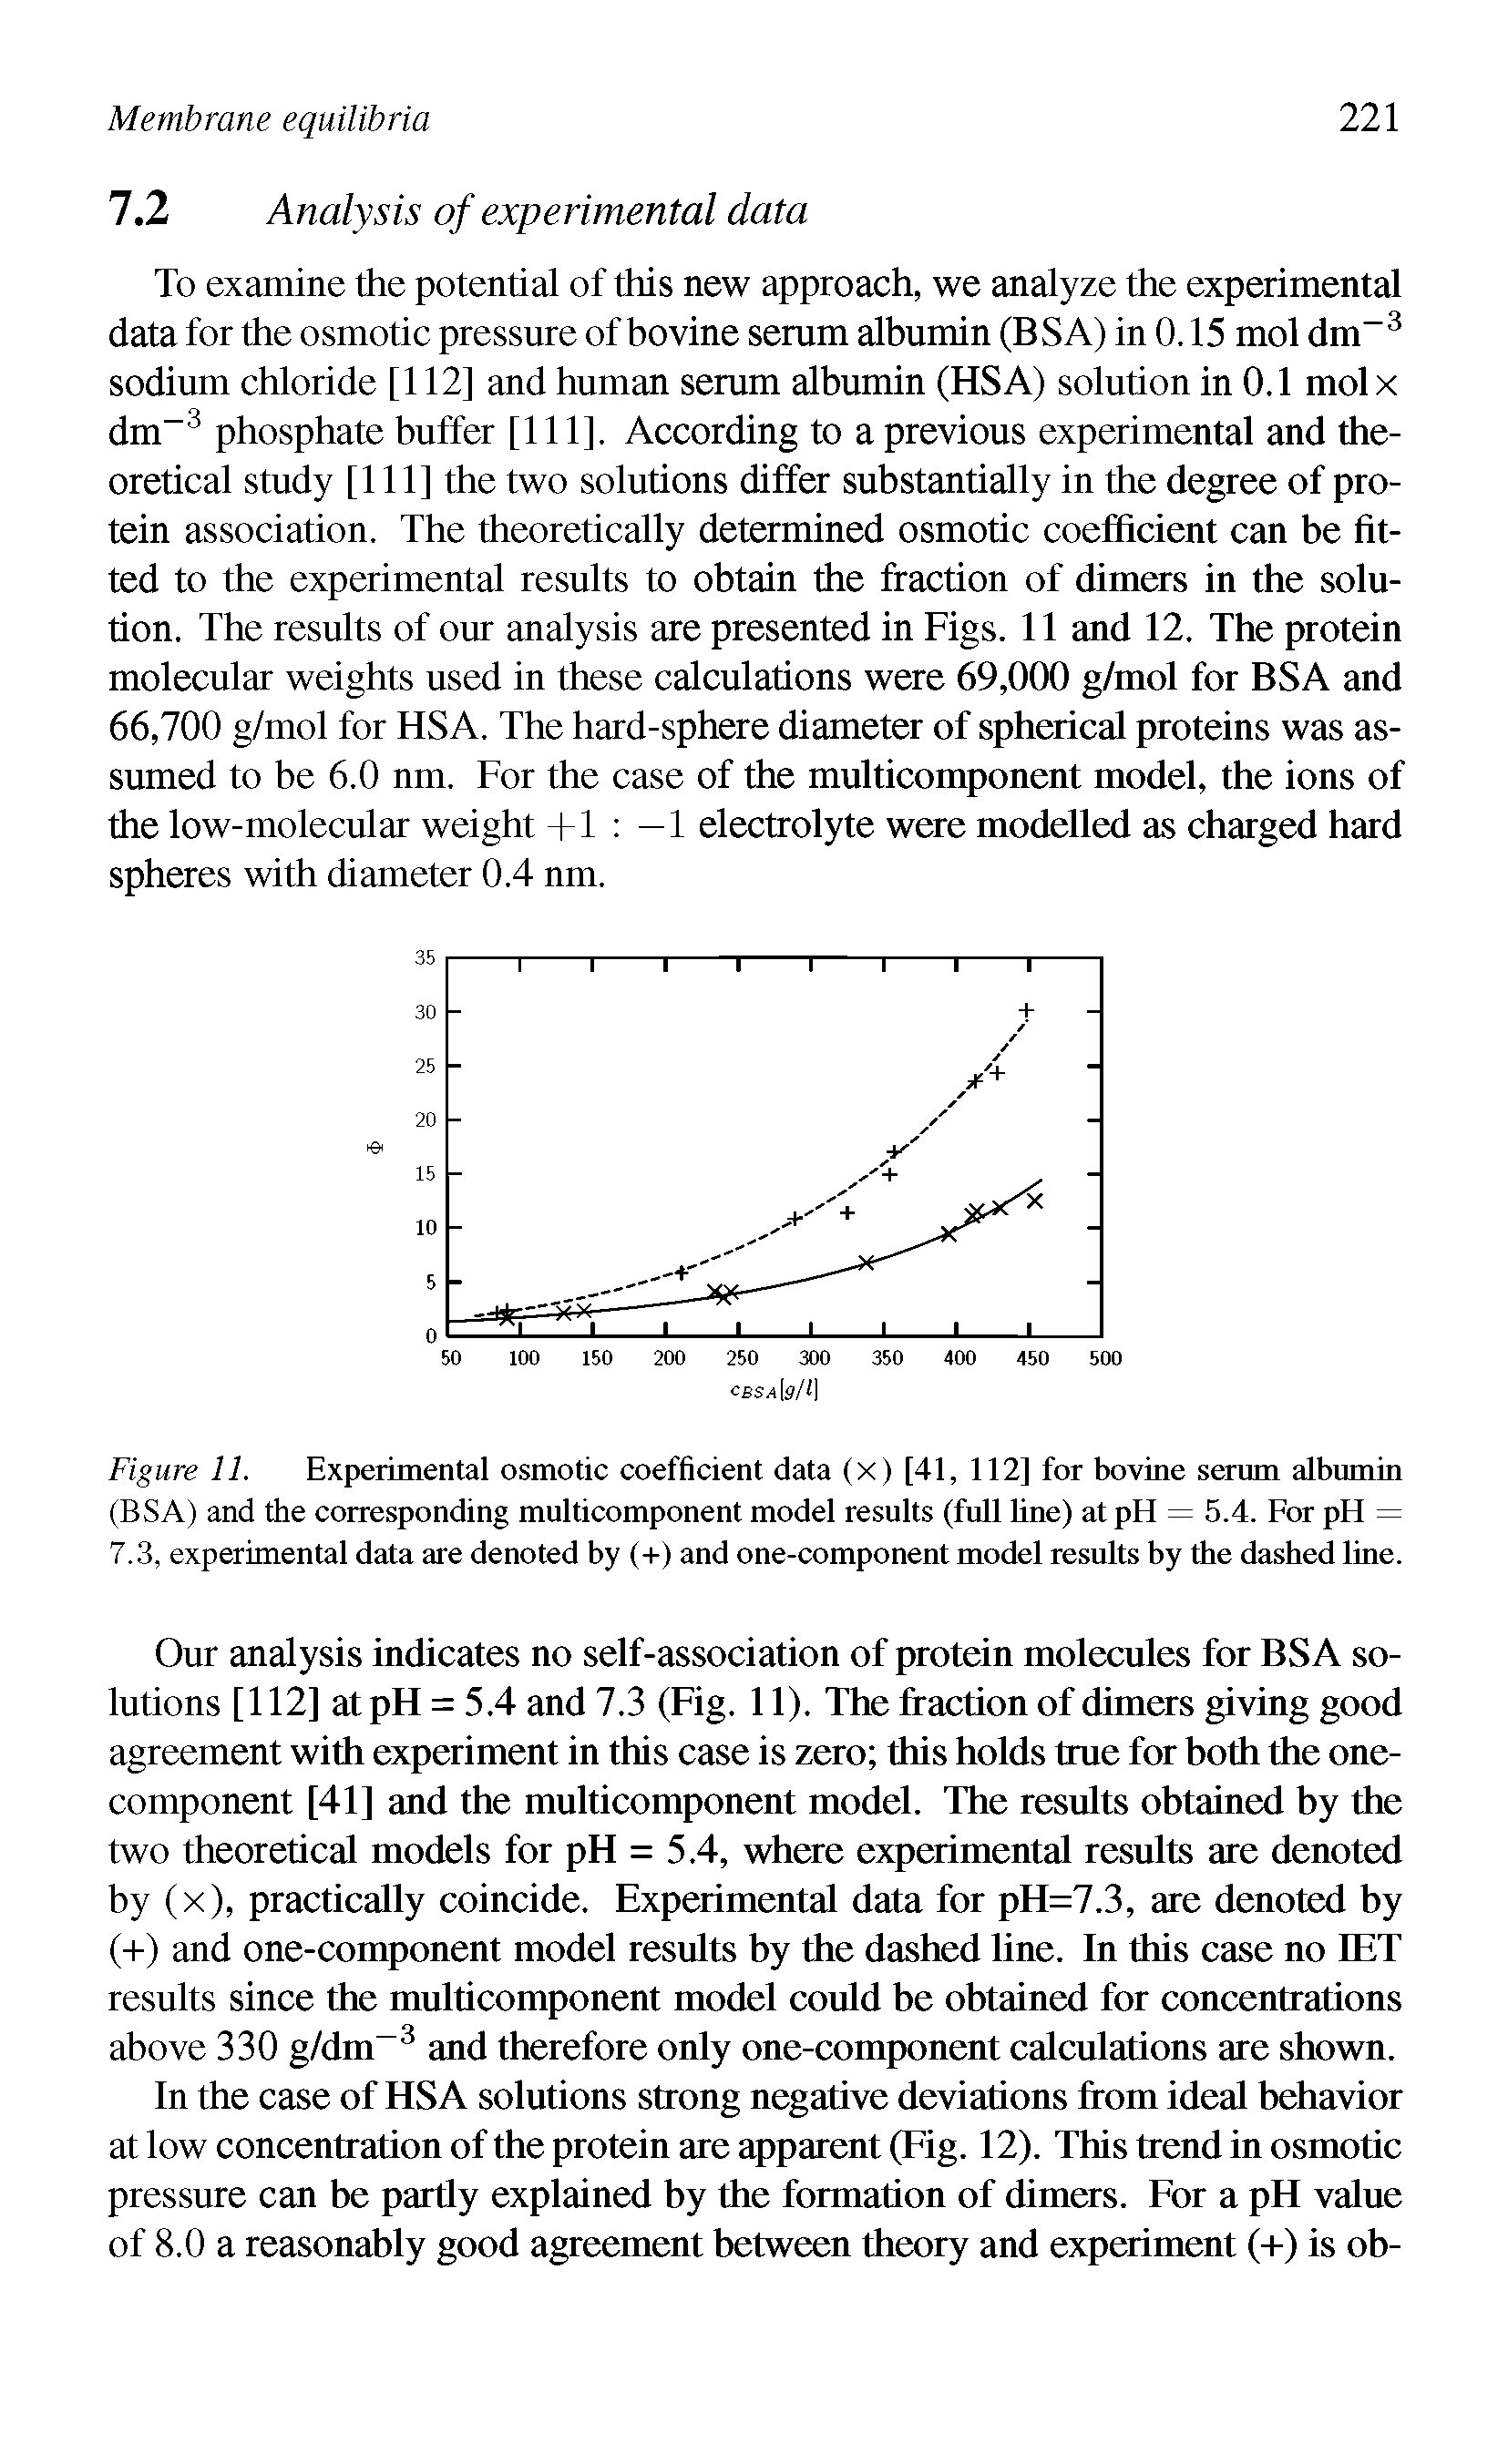 Figure 11. Experimental osmotic coefficient data (X) [41, 112] for bovine serum albumin (BSA) and the corresponding multicomponent model results (full line) at pH = 5.4. For pH = 7.3, experimental data are denoted by (+) and one-component model results by the dashed line.